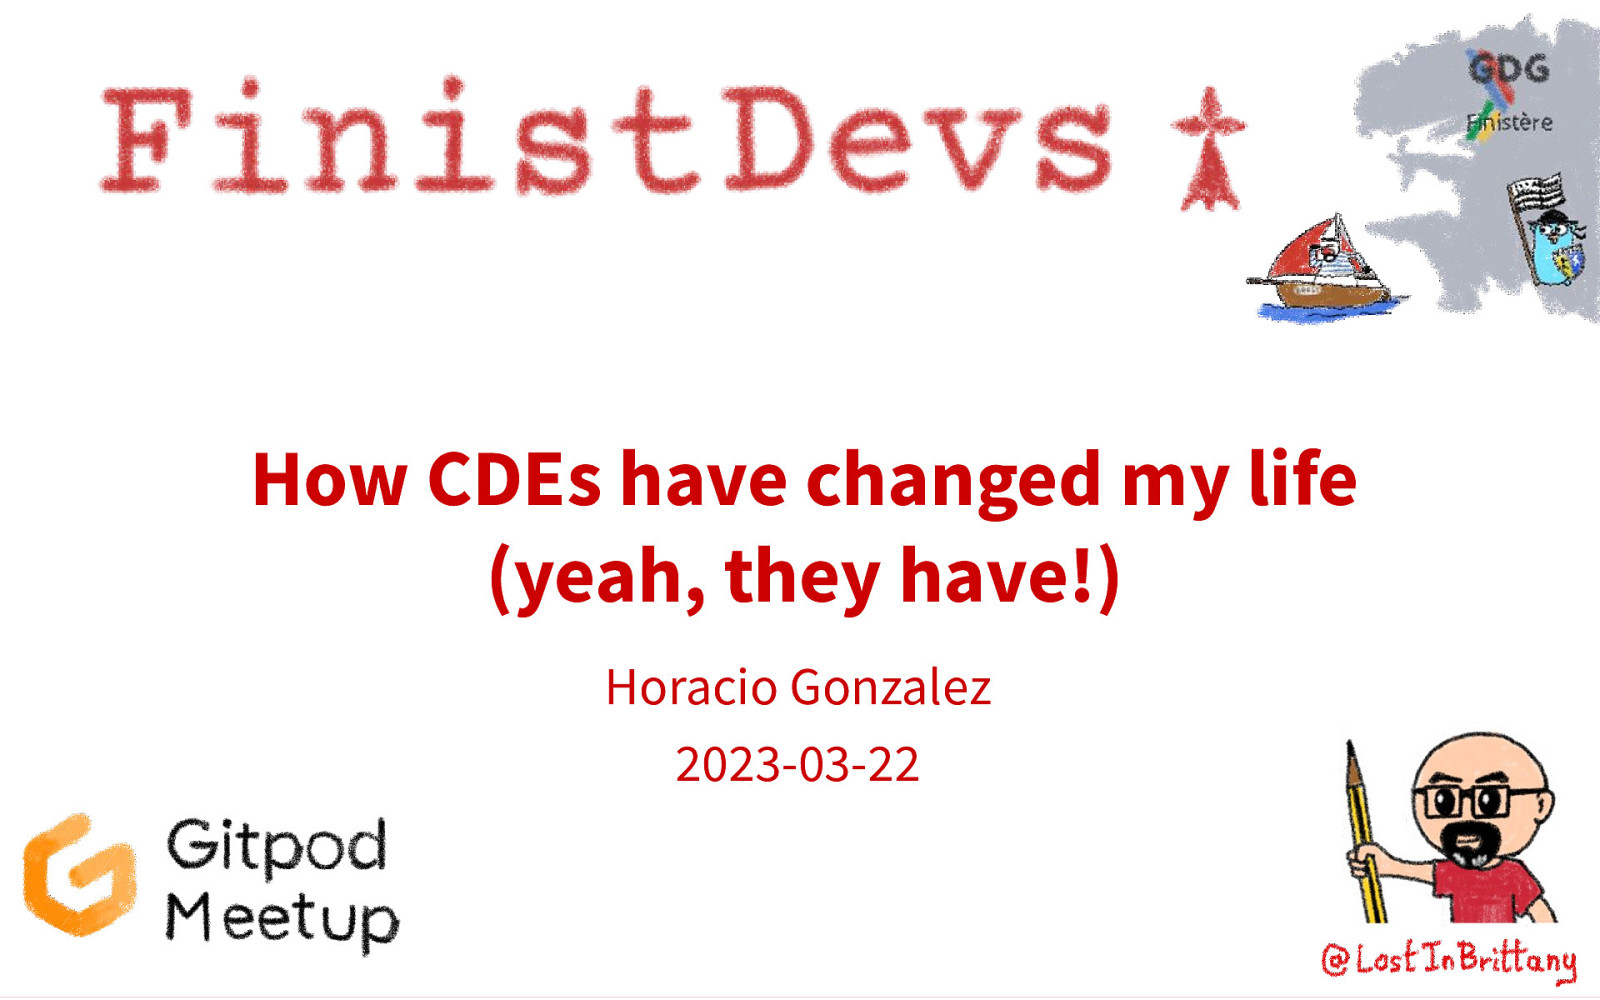 How CDEs have changed my life (yeah, they have!) by Horacio Gonzalez